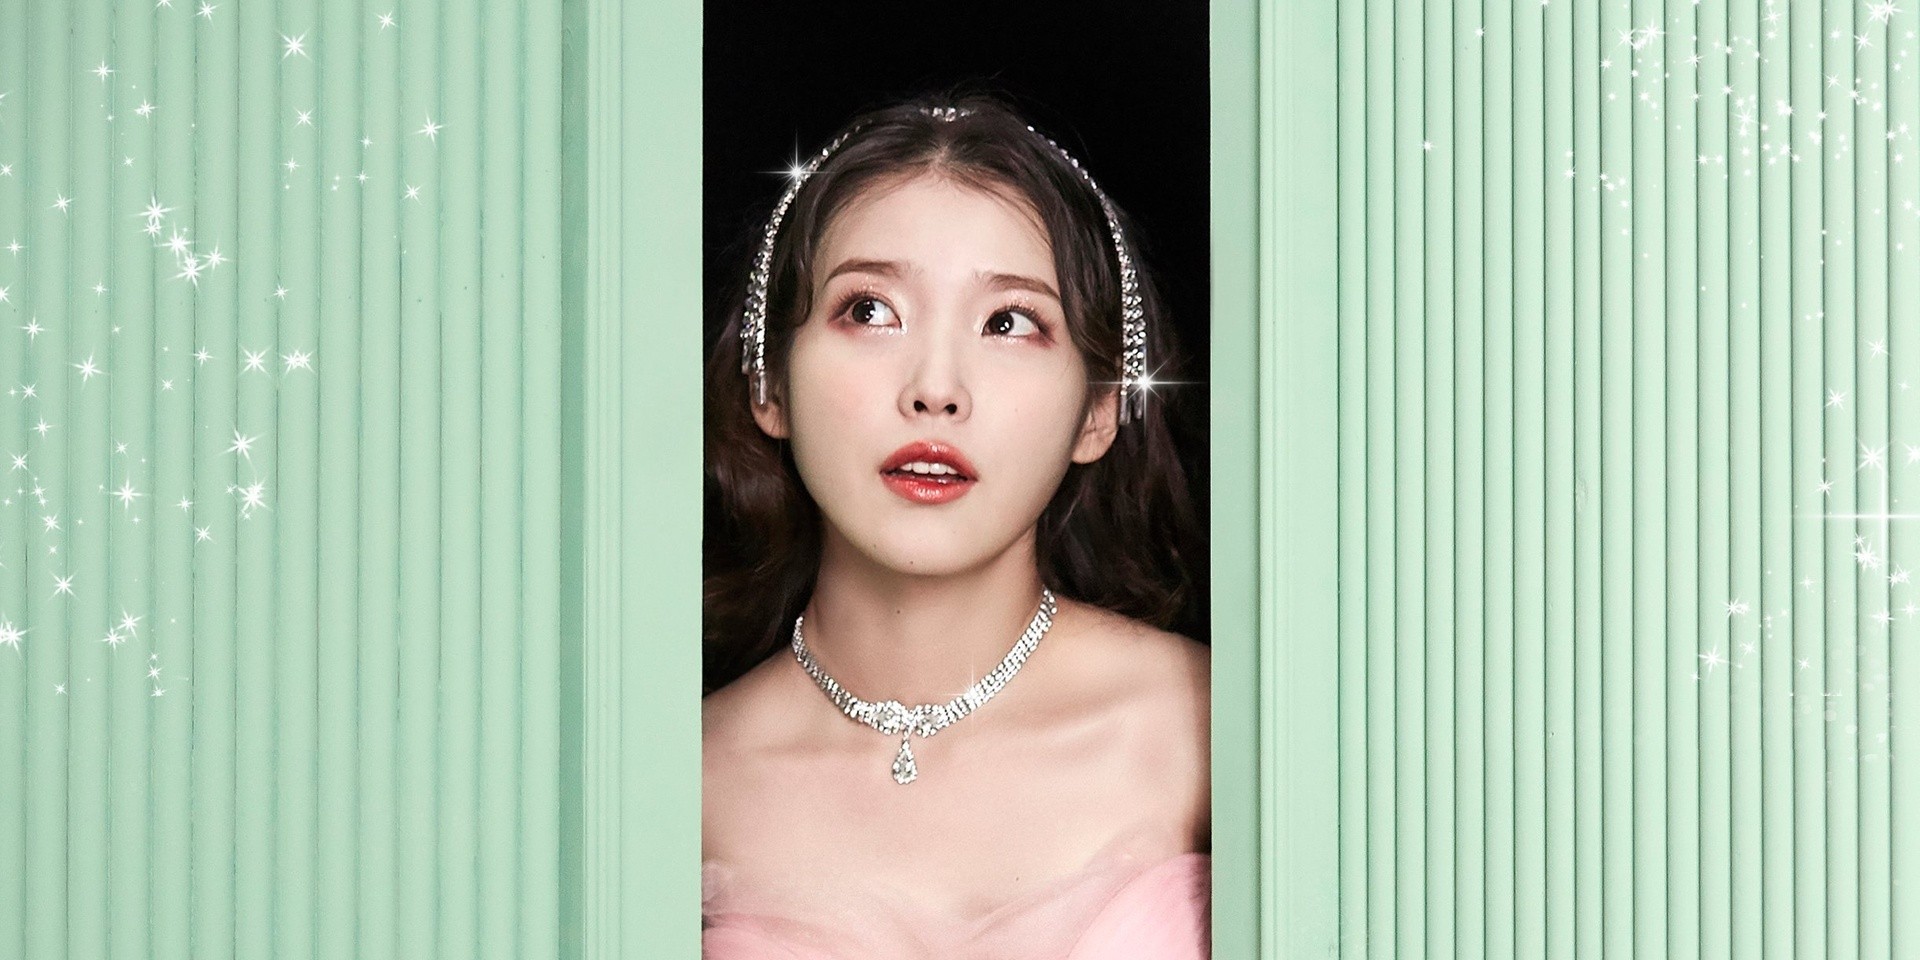 Here's everything you need to know about LILAC, IU's fifth album